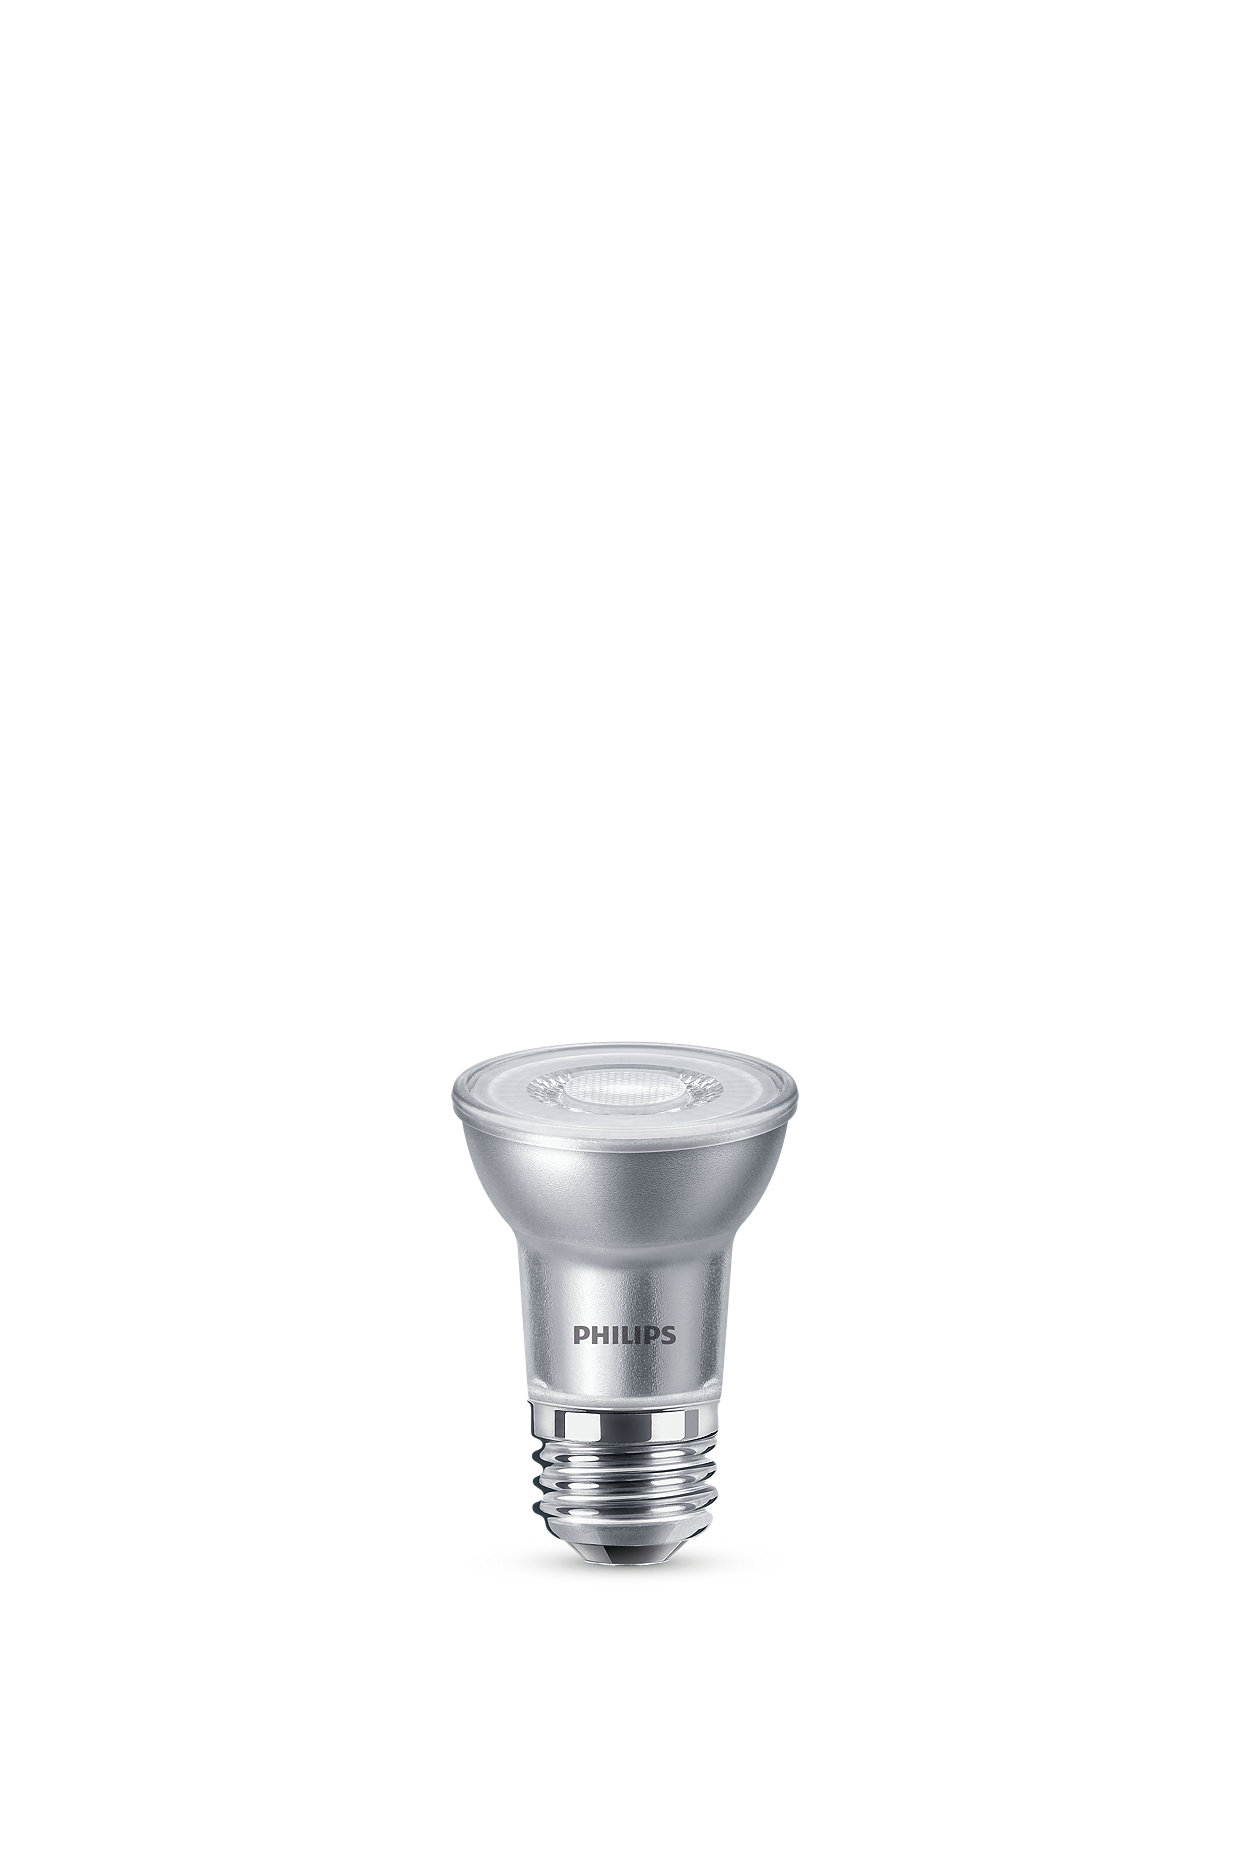 Dimmable LED light with a focused bright beam